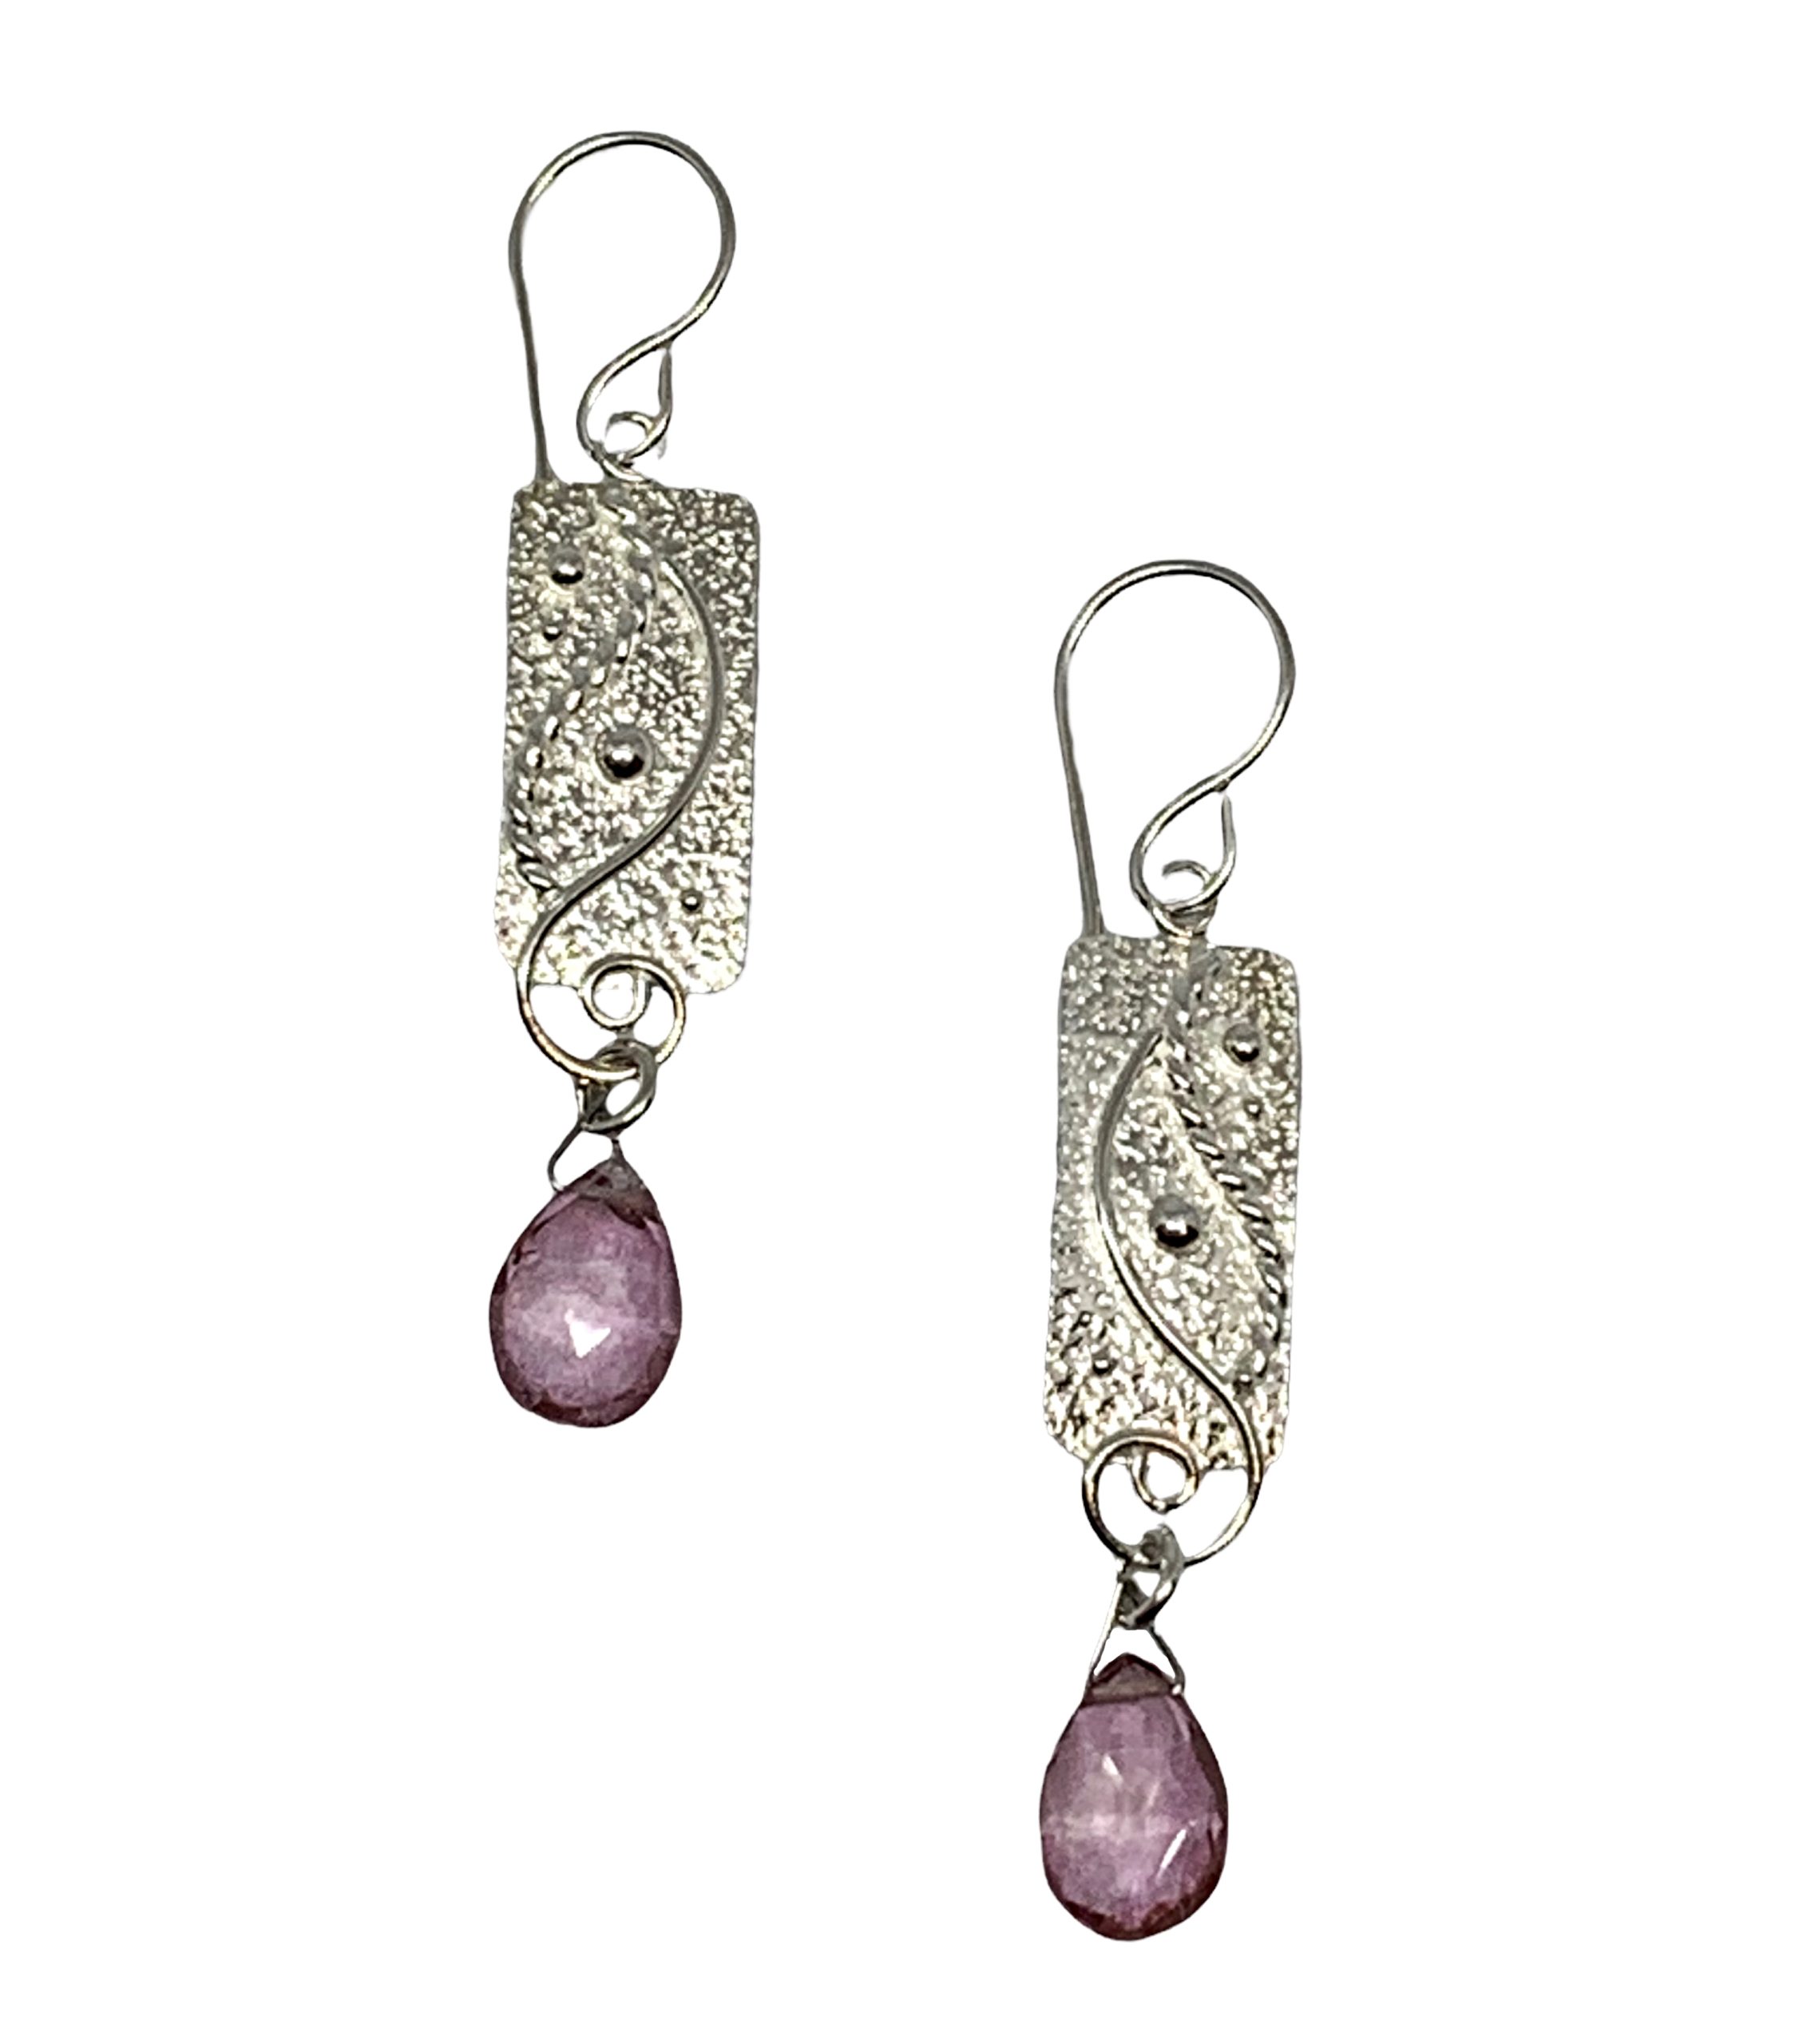 Handmade silver + pink topaz earrings by A&R Jewellery | Effusion Art Gallery + Cast Glass Studio, Invermere BC